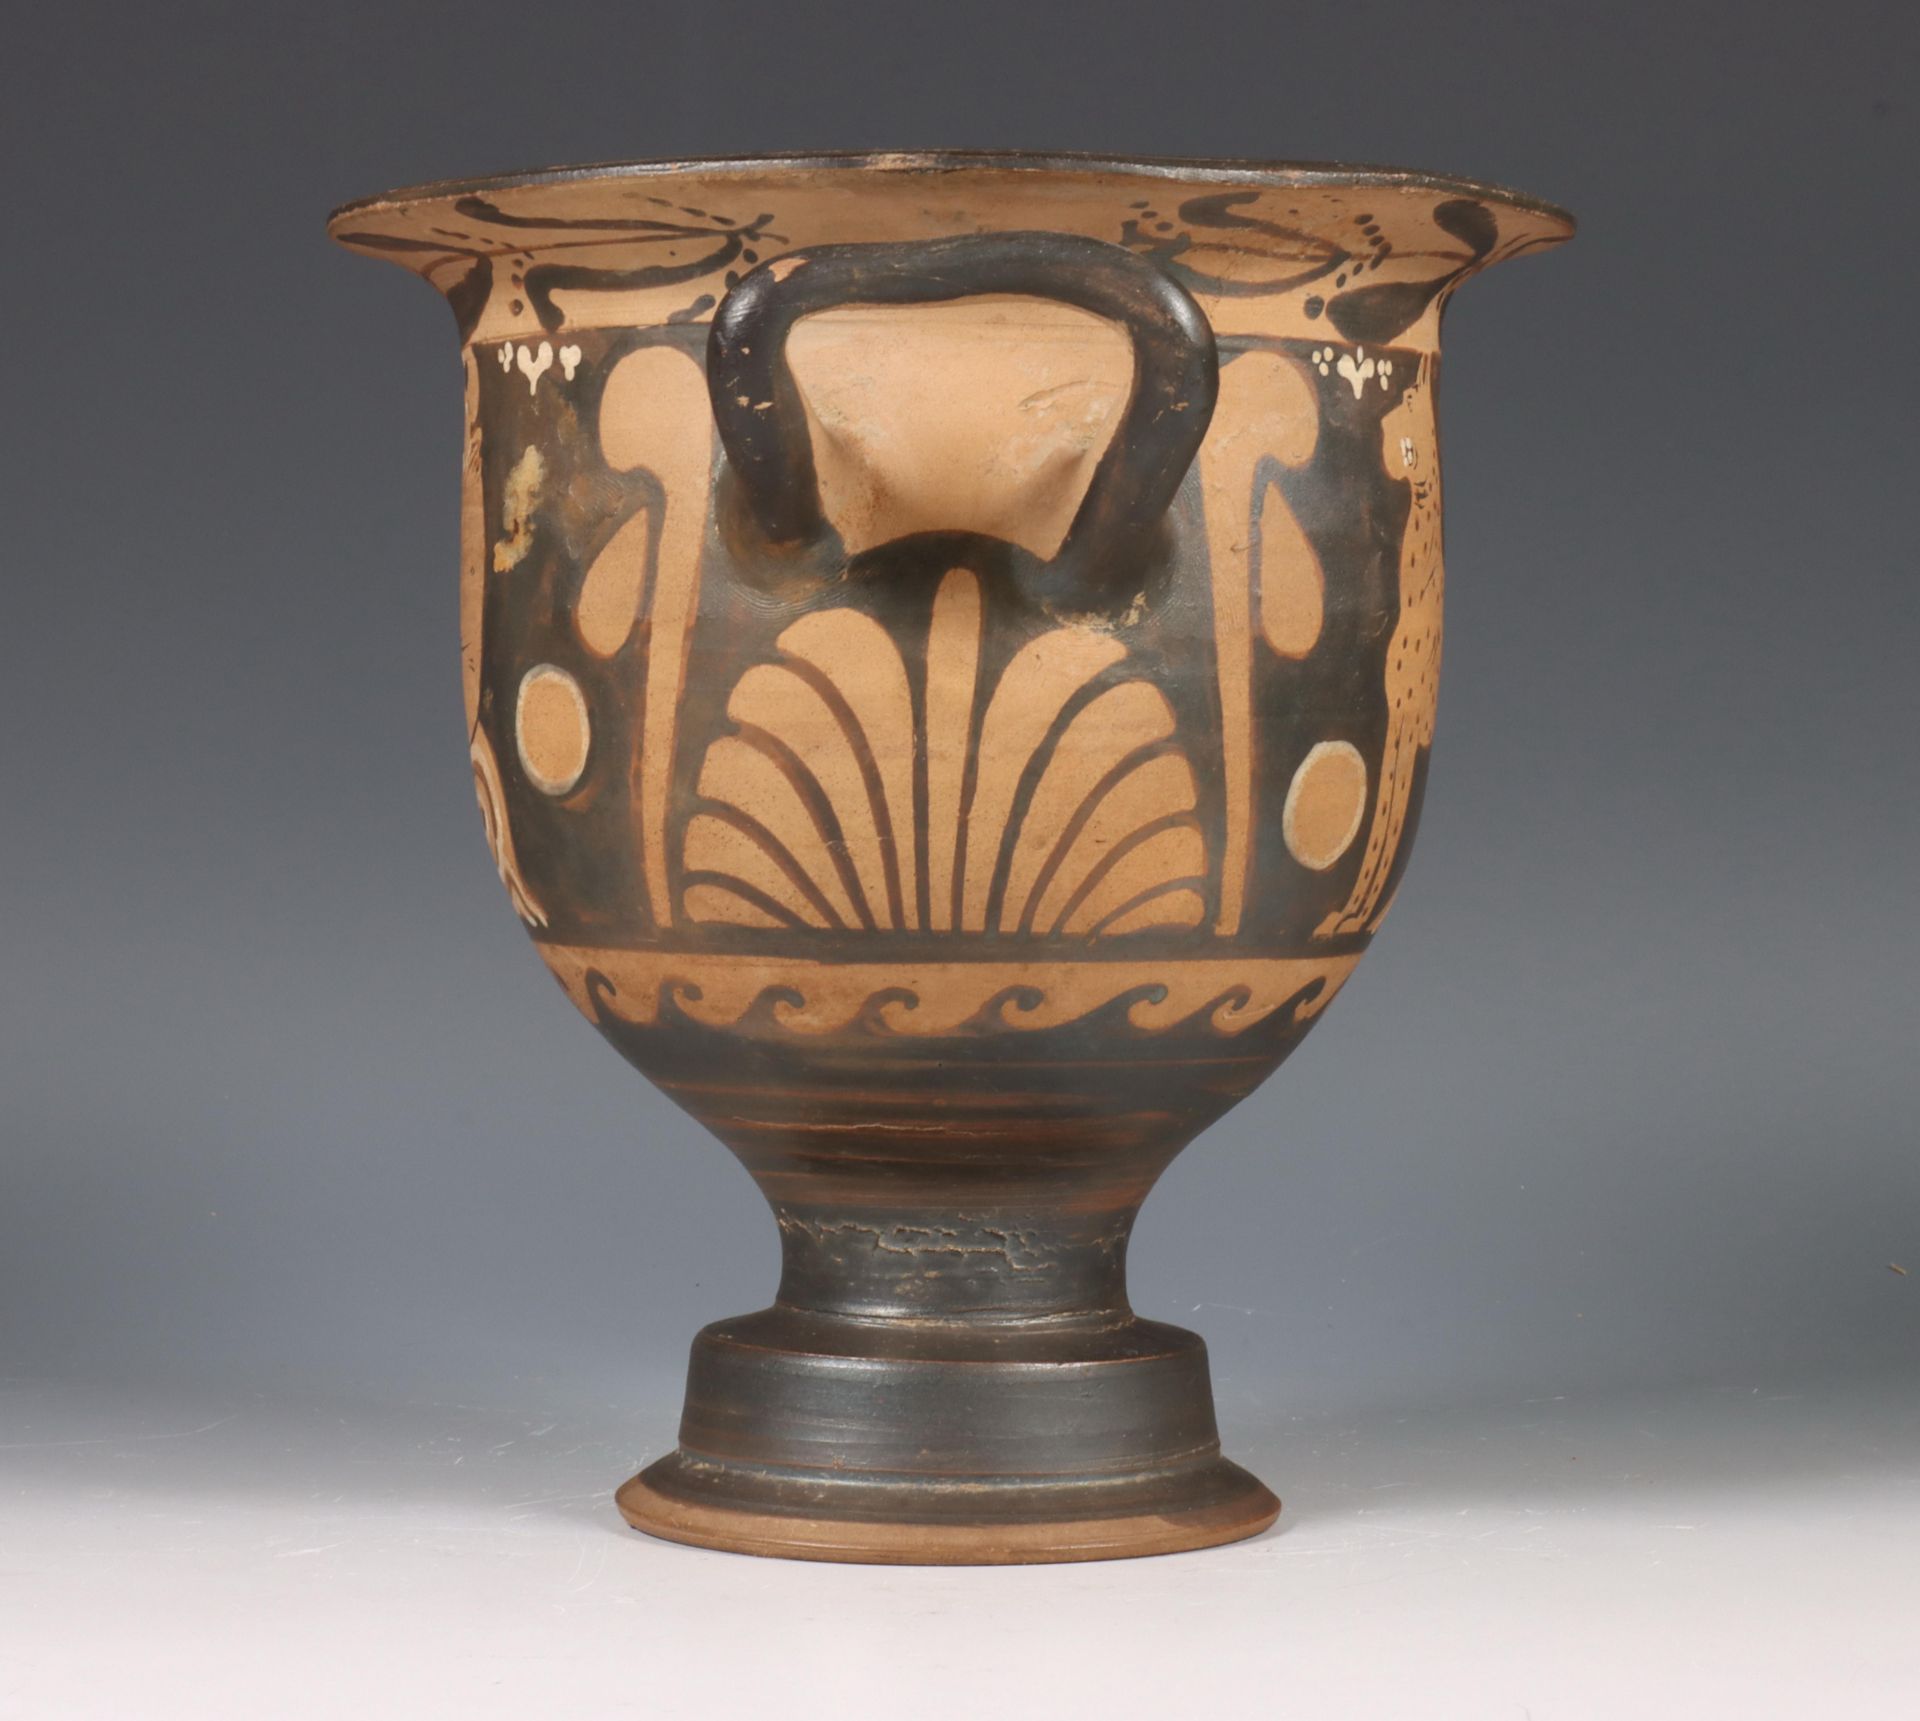 Apulia, small earthenware krater, ca. 300 BC. - Image 3 of 6